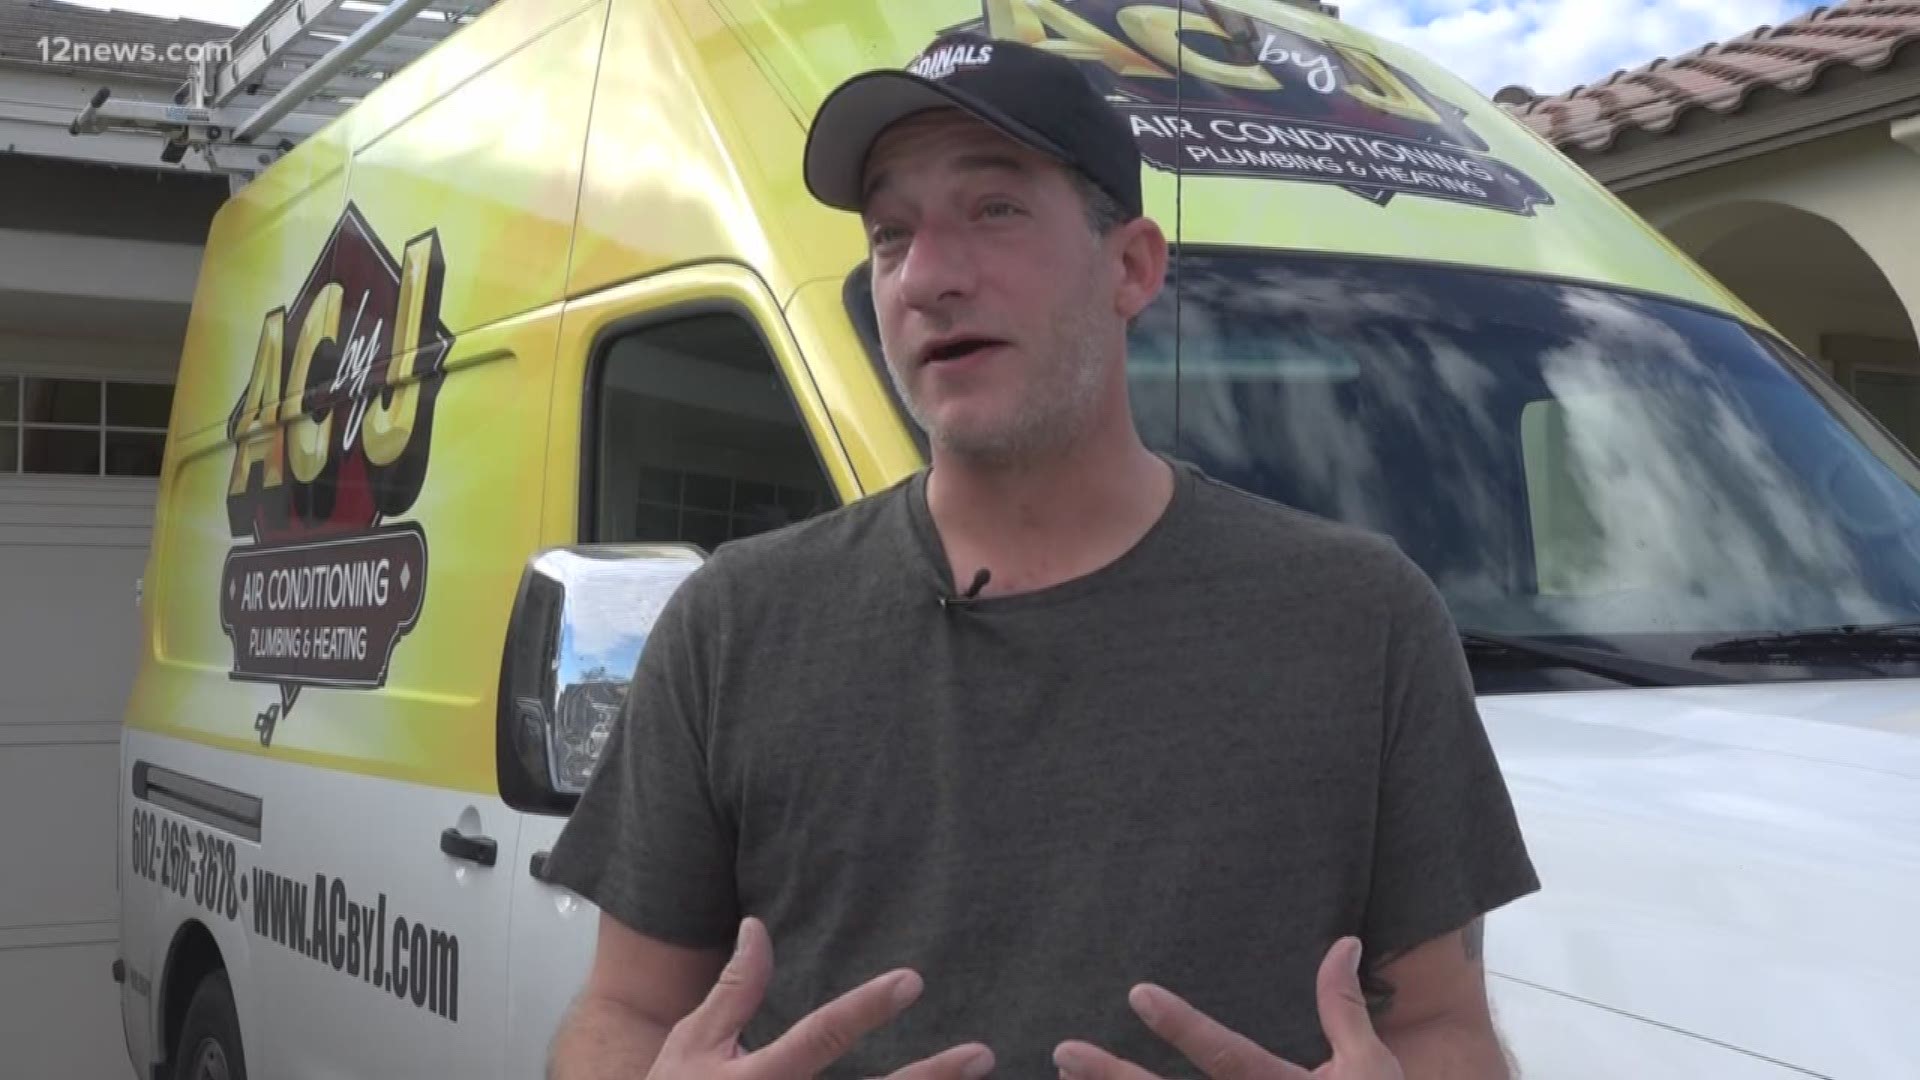 Timothy Anderson says the Verrado HOA claims his work truck violates the rules and told him he can't park it anywhere within the Buckeye housing community.